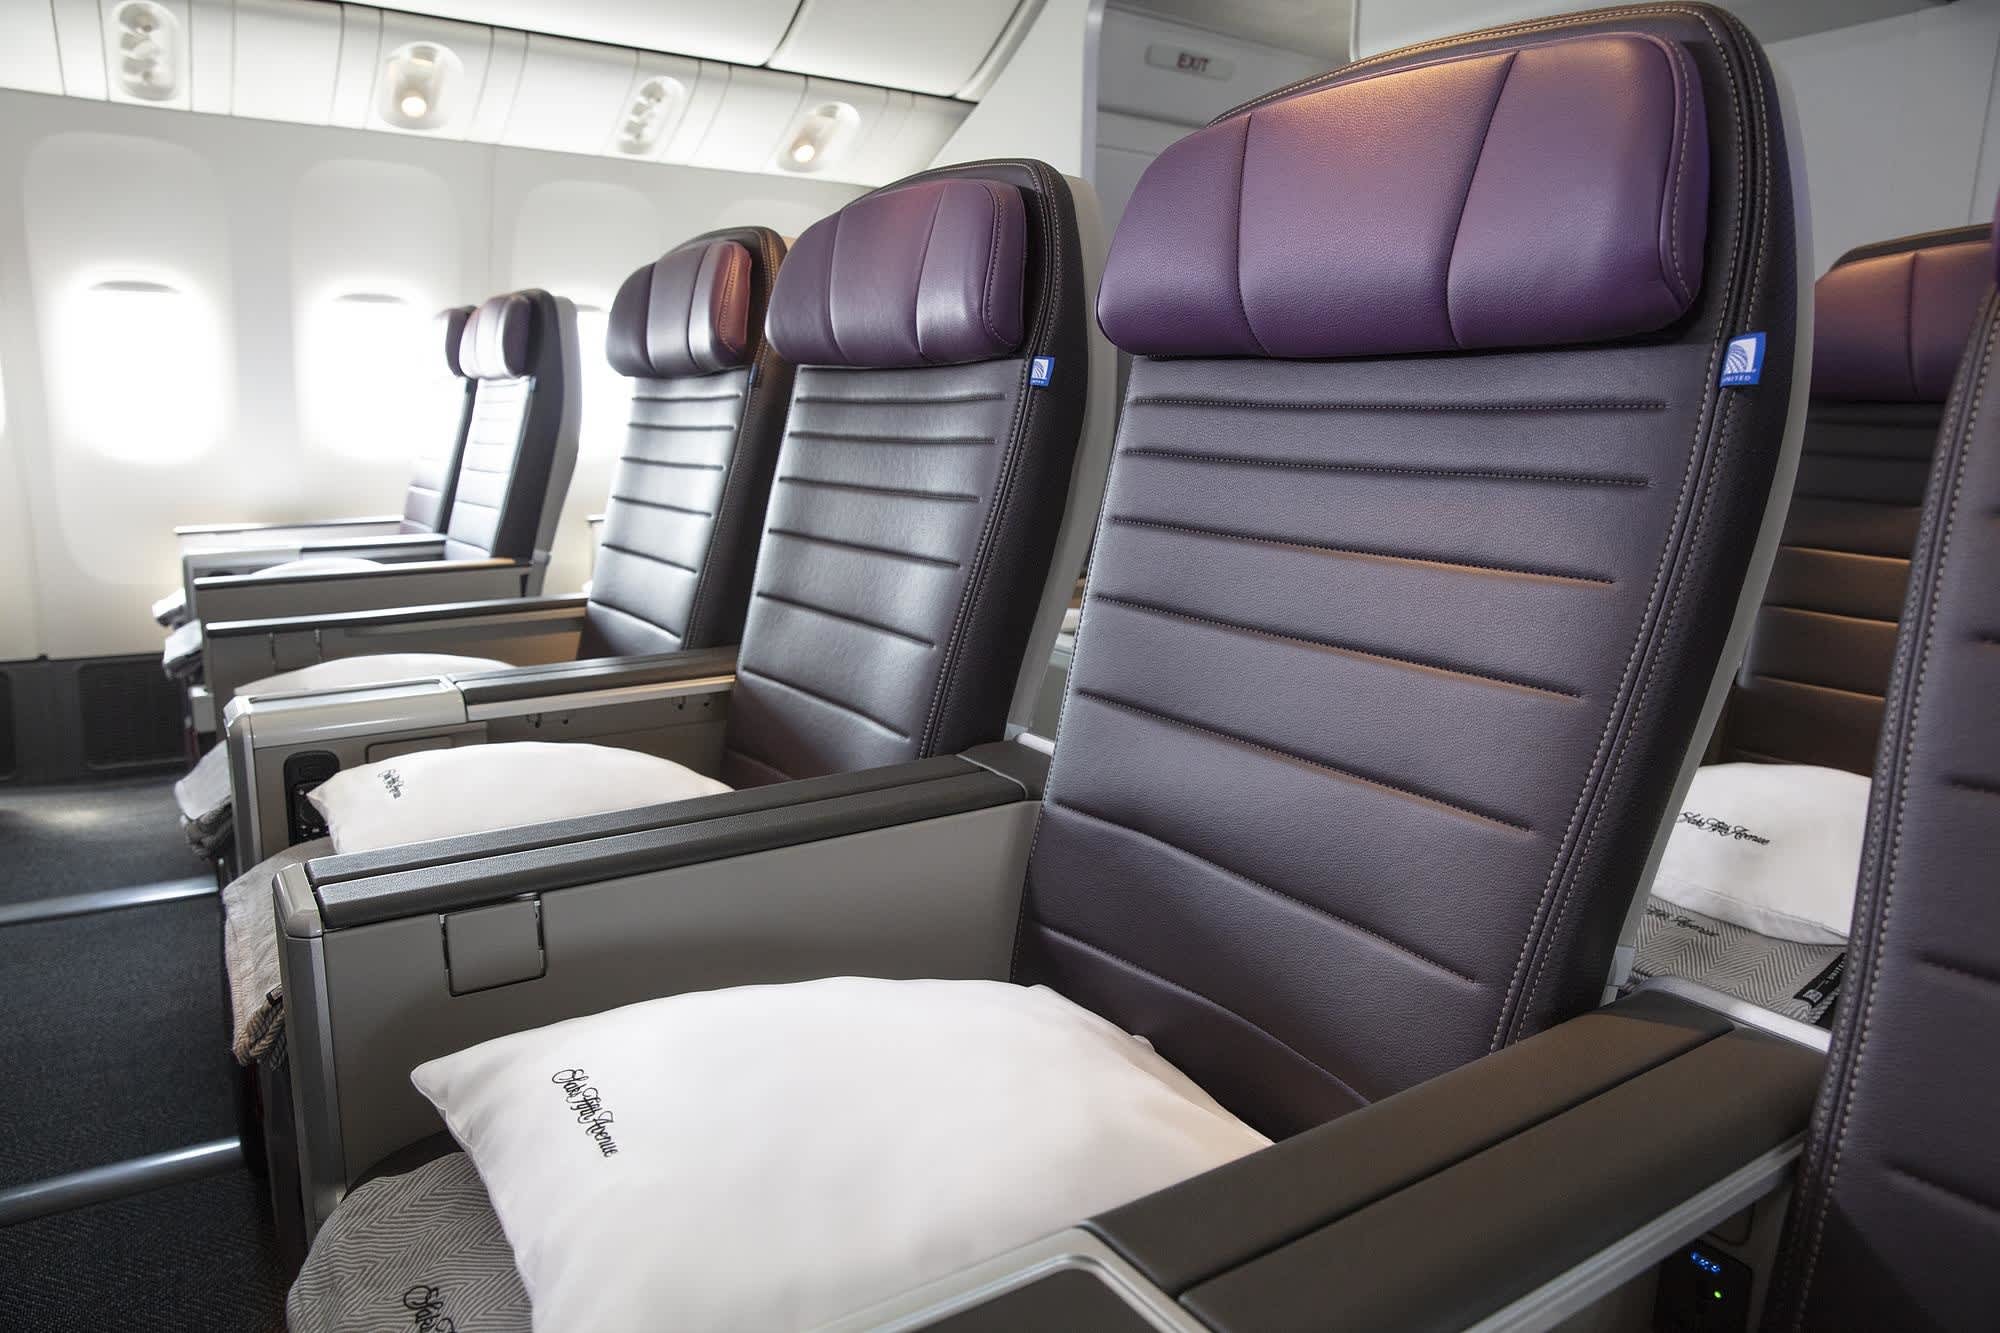 United Airlines starts selling tickets in new premium economy class